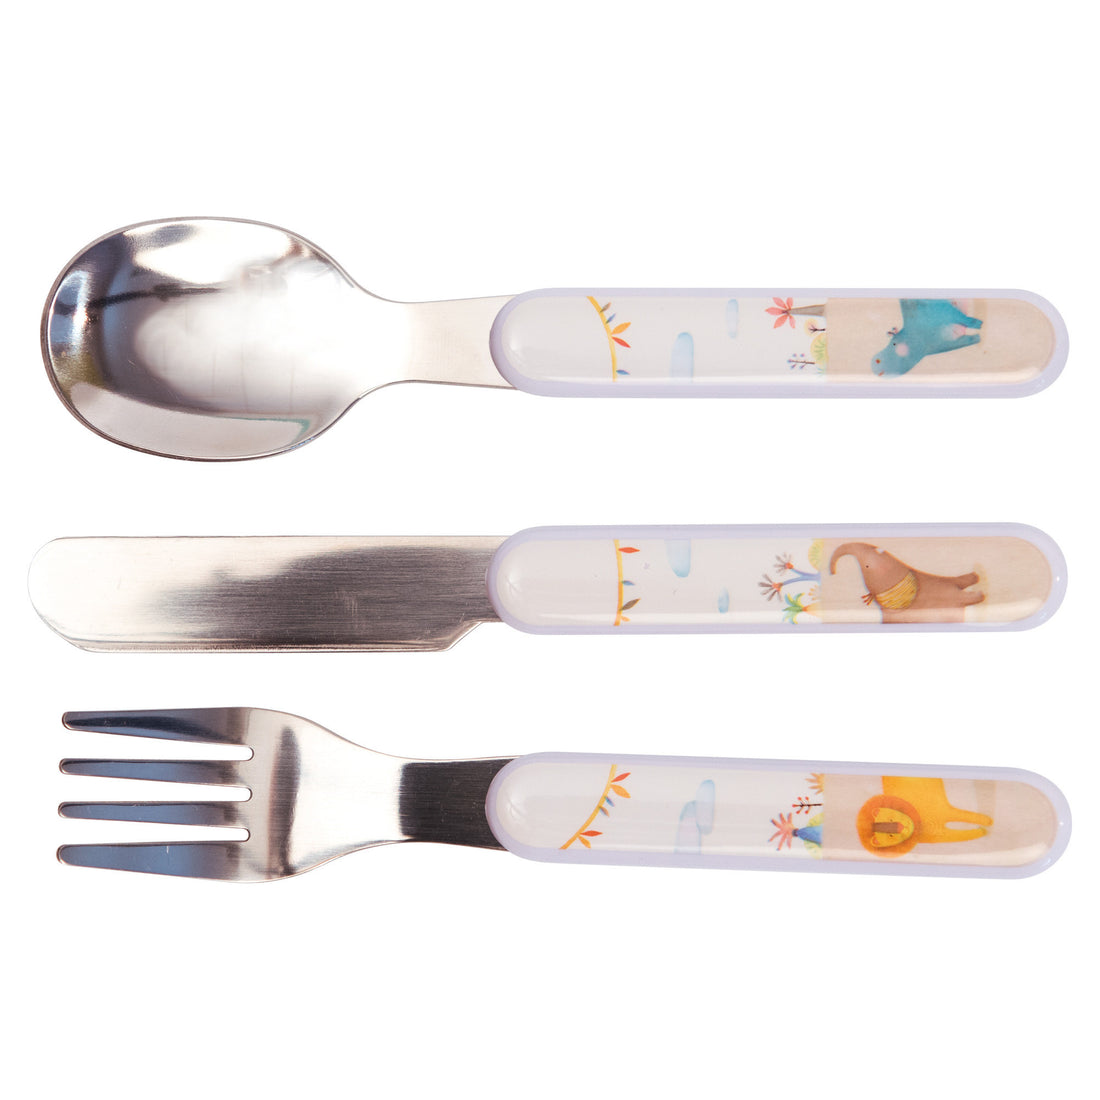 moulin-roty-baby-safe-cutlery-lpa-01